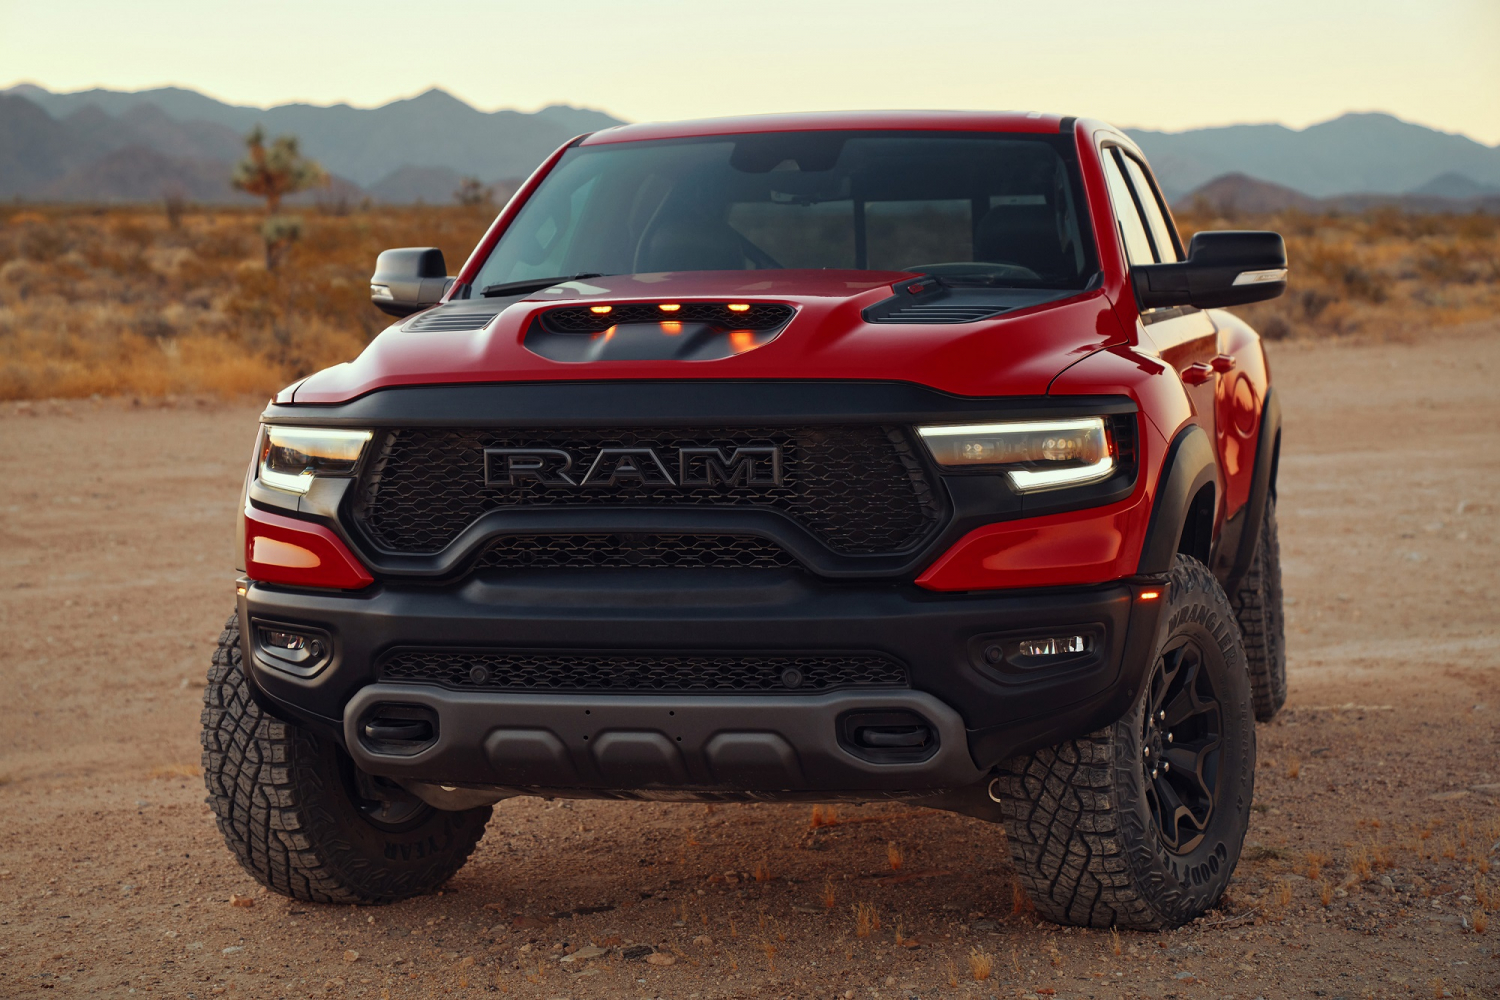 Ram 1500 Trx 2500 Night Edition Tempt With Sinister Looks Capability To Match